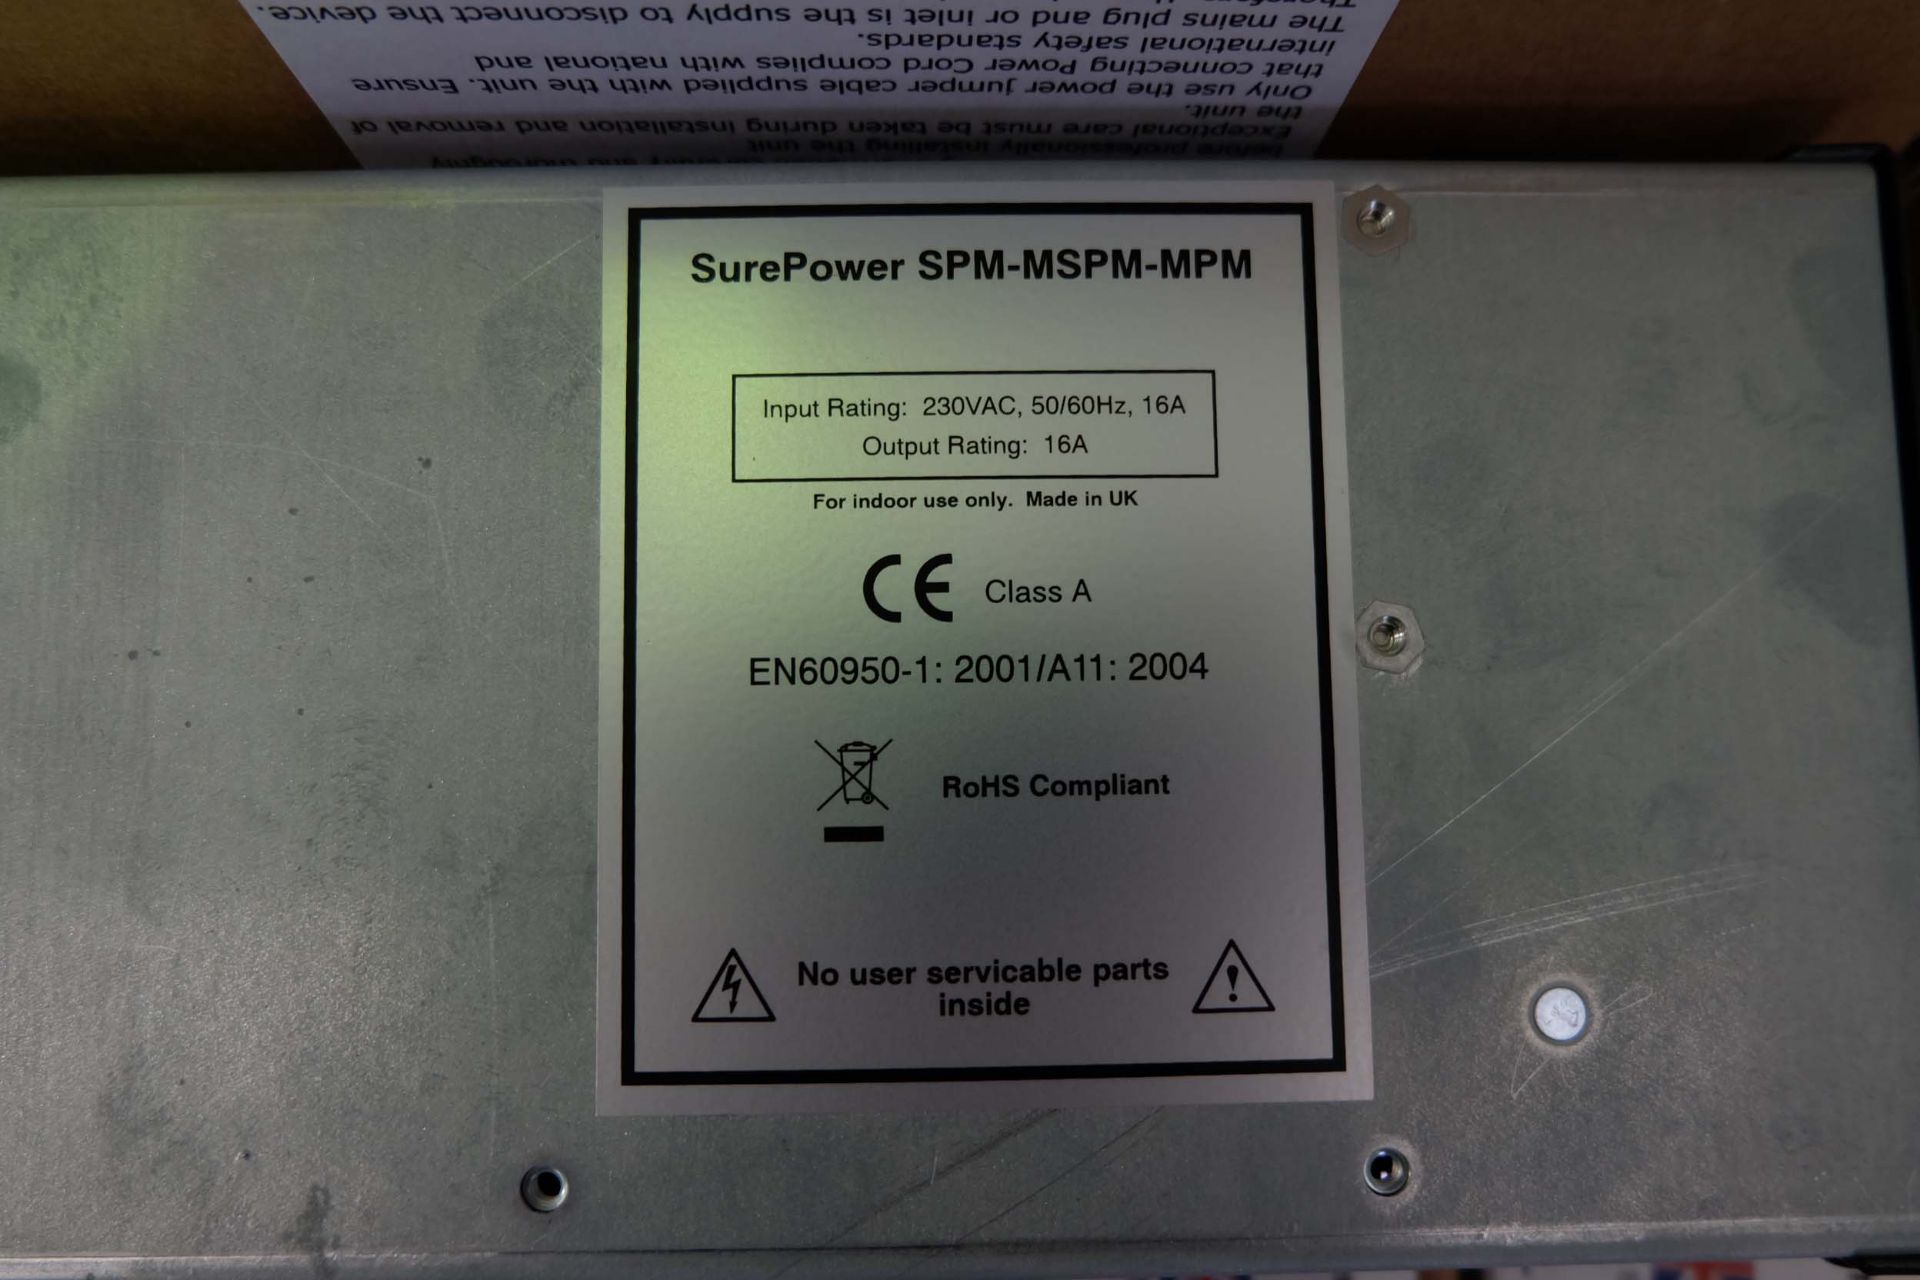 8 x Sure Power -MSPM - 16 Power Packs With 16 Amp Circuit Breaker - Image 5 of 5